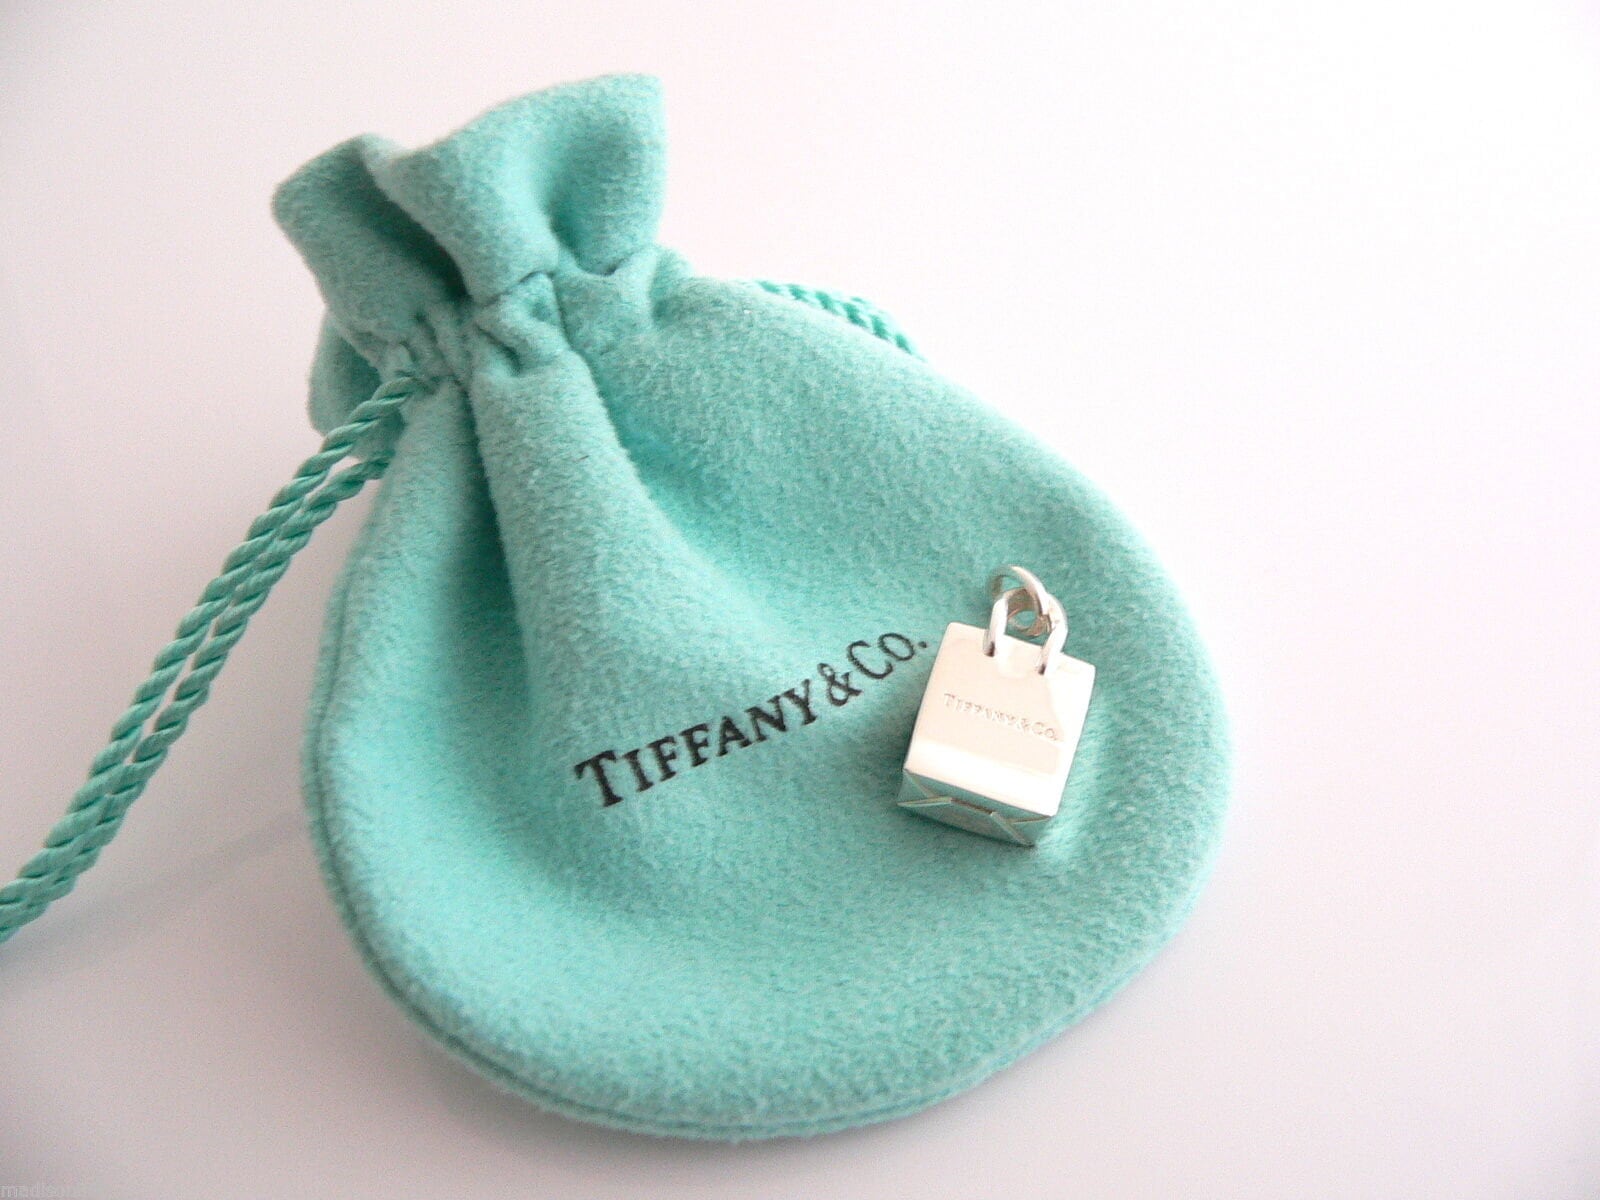 Tiffany's Drops New Accessory in Shape of Iconic Shopping Bag